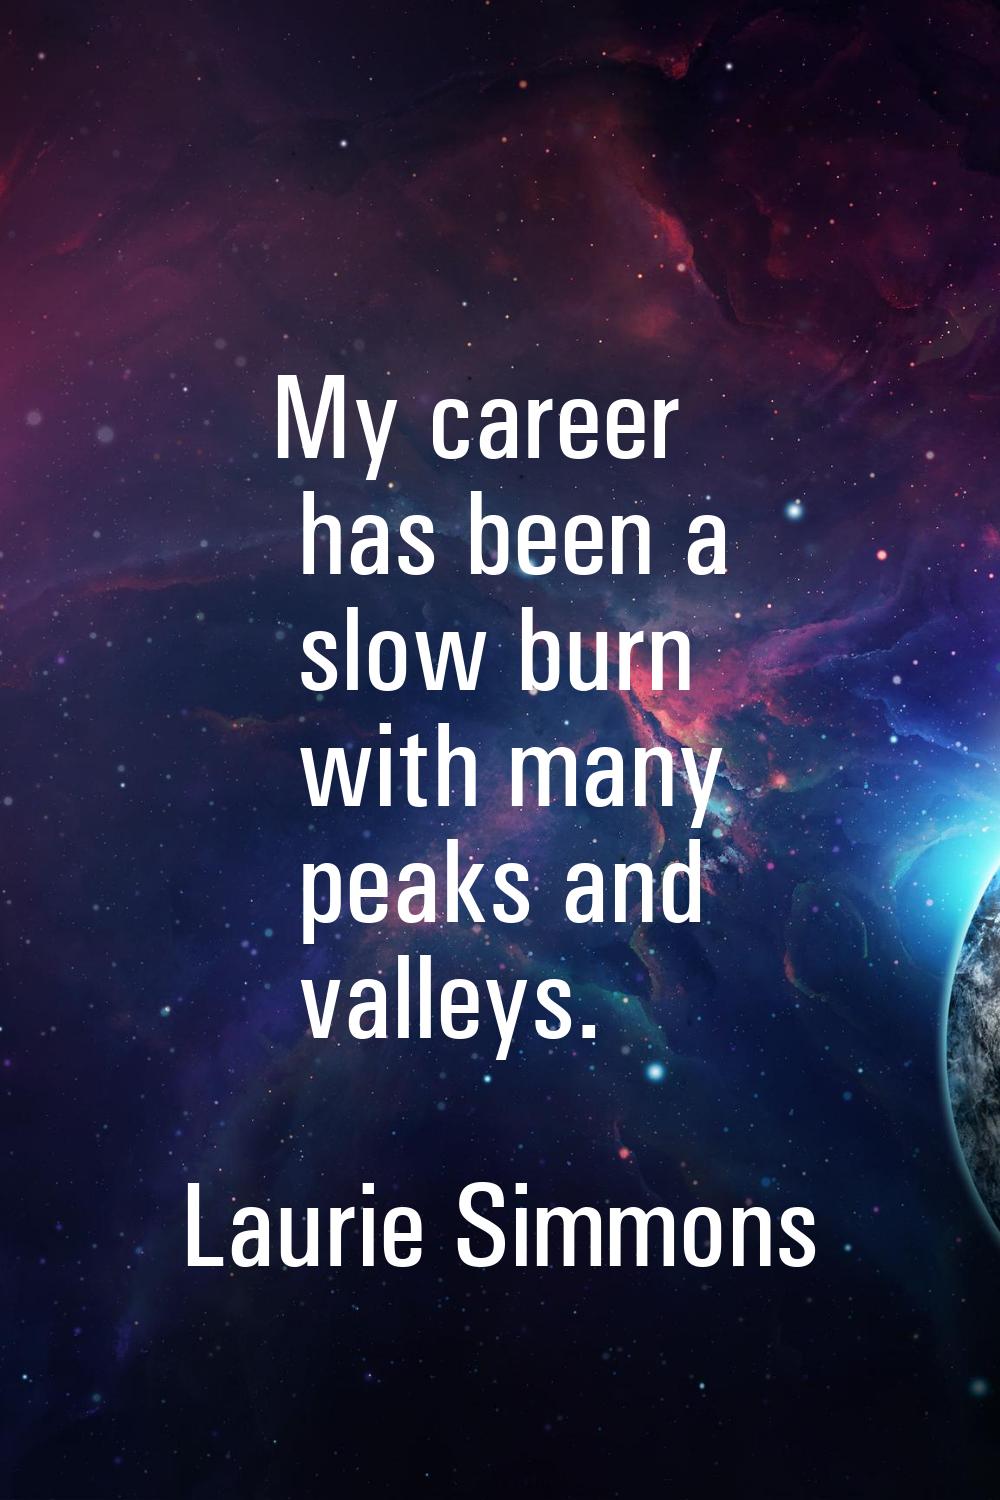 My career has been a slow burn with many peaks and valleys.